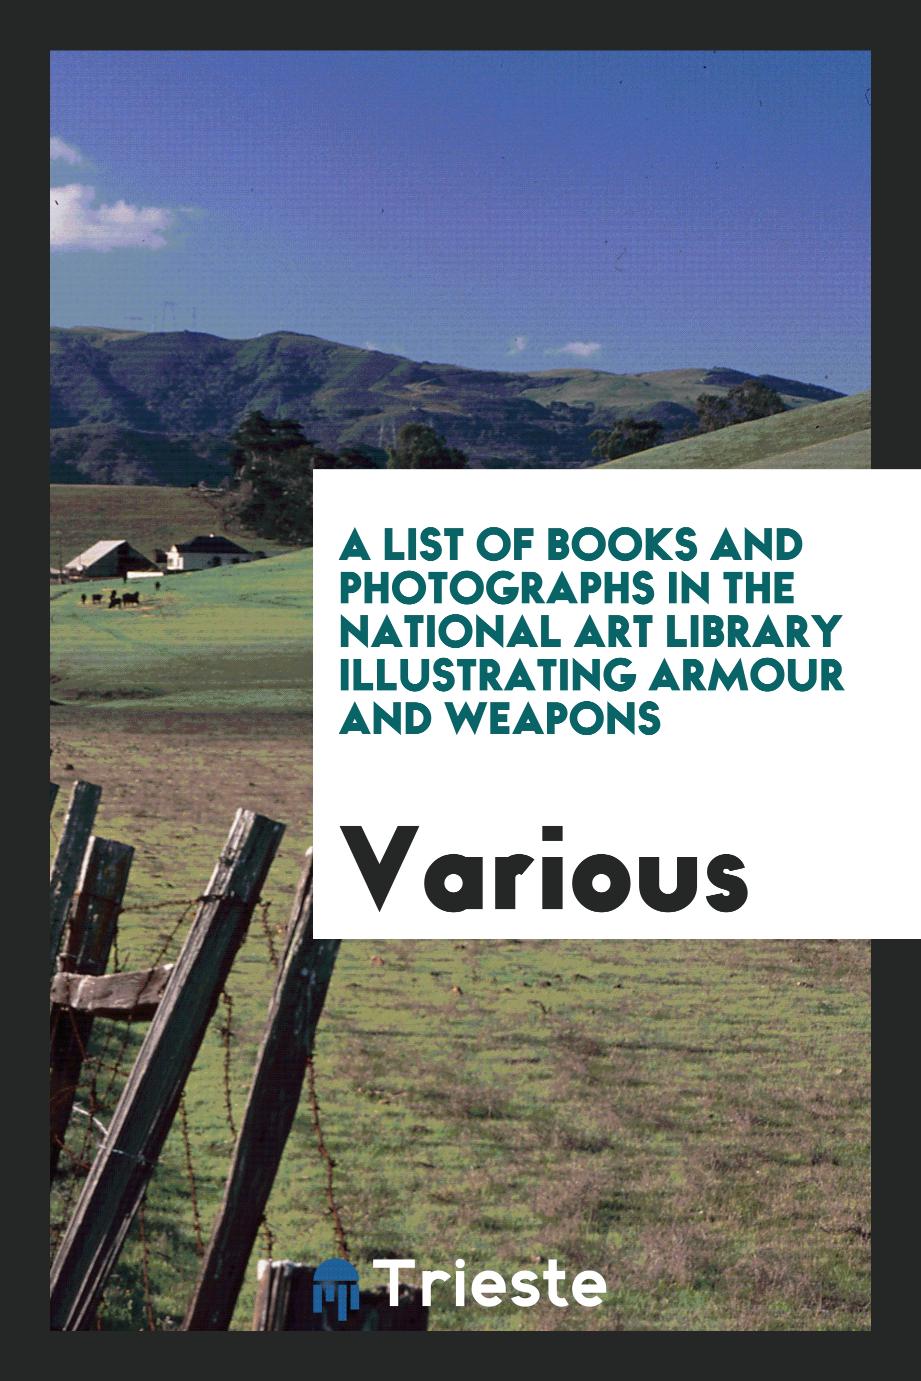 A list of books and photographs in the National art library illustrating armour and weapons